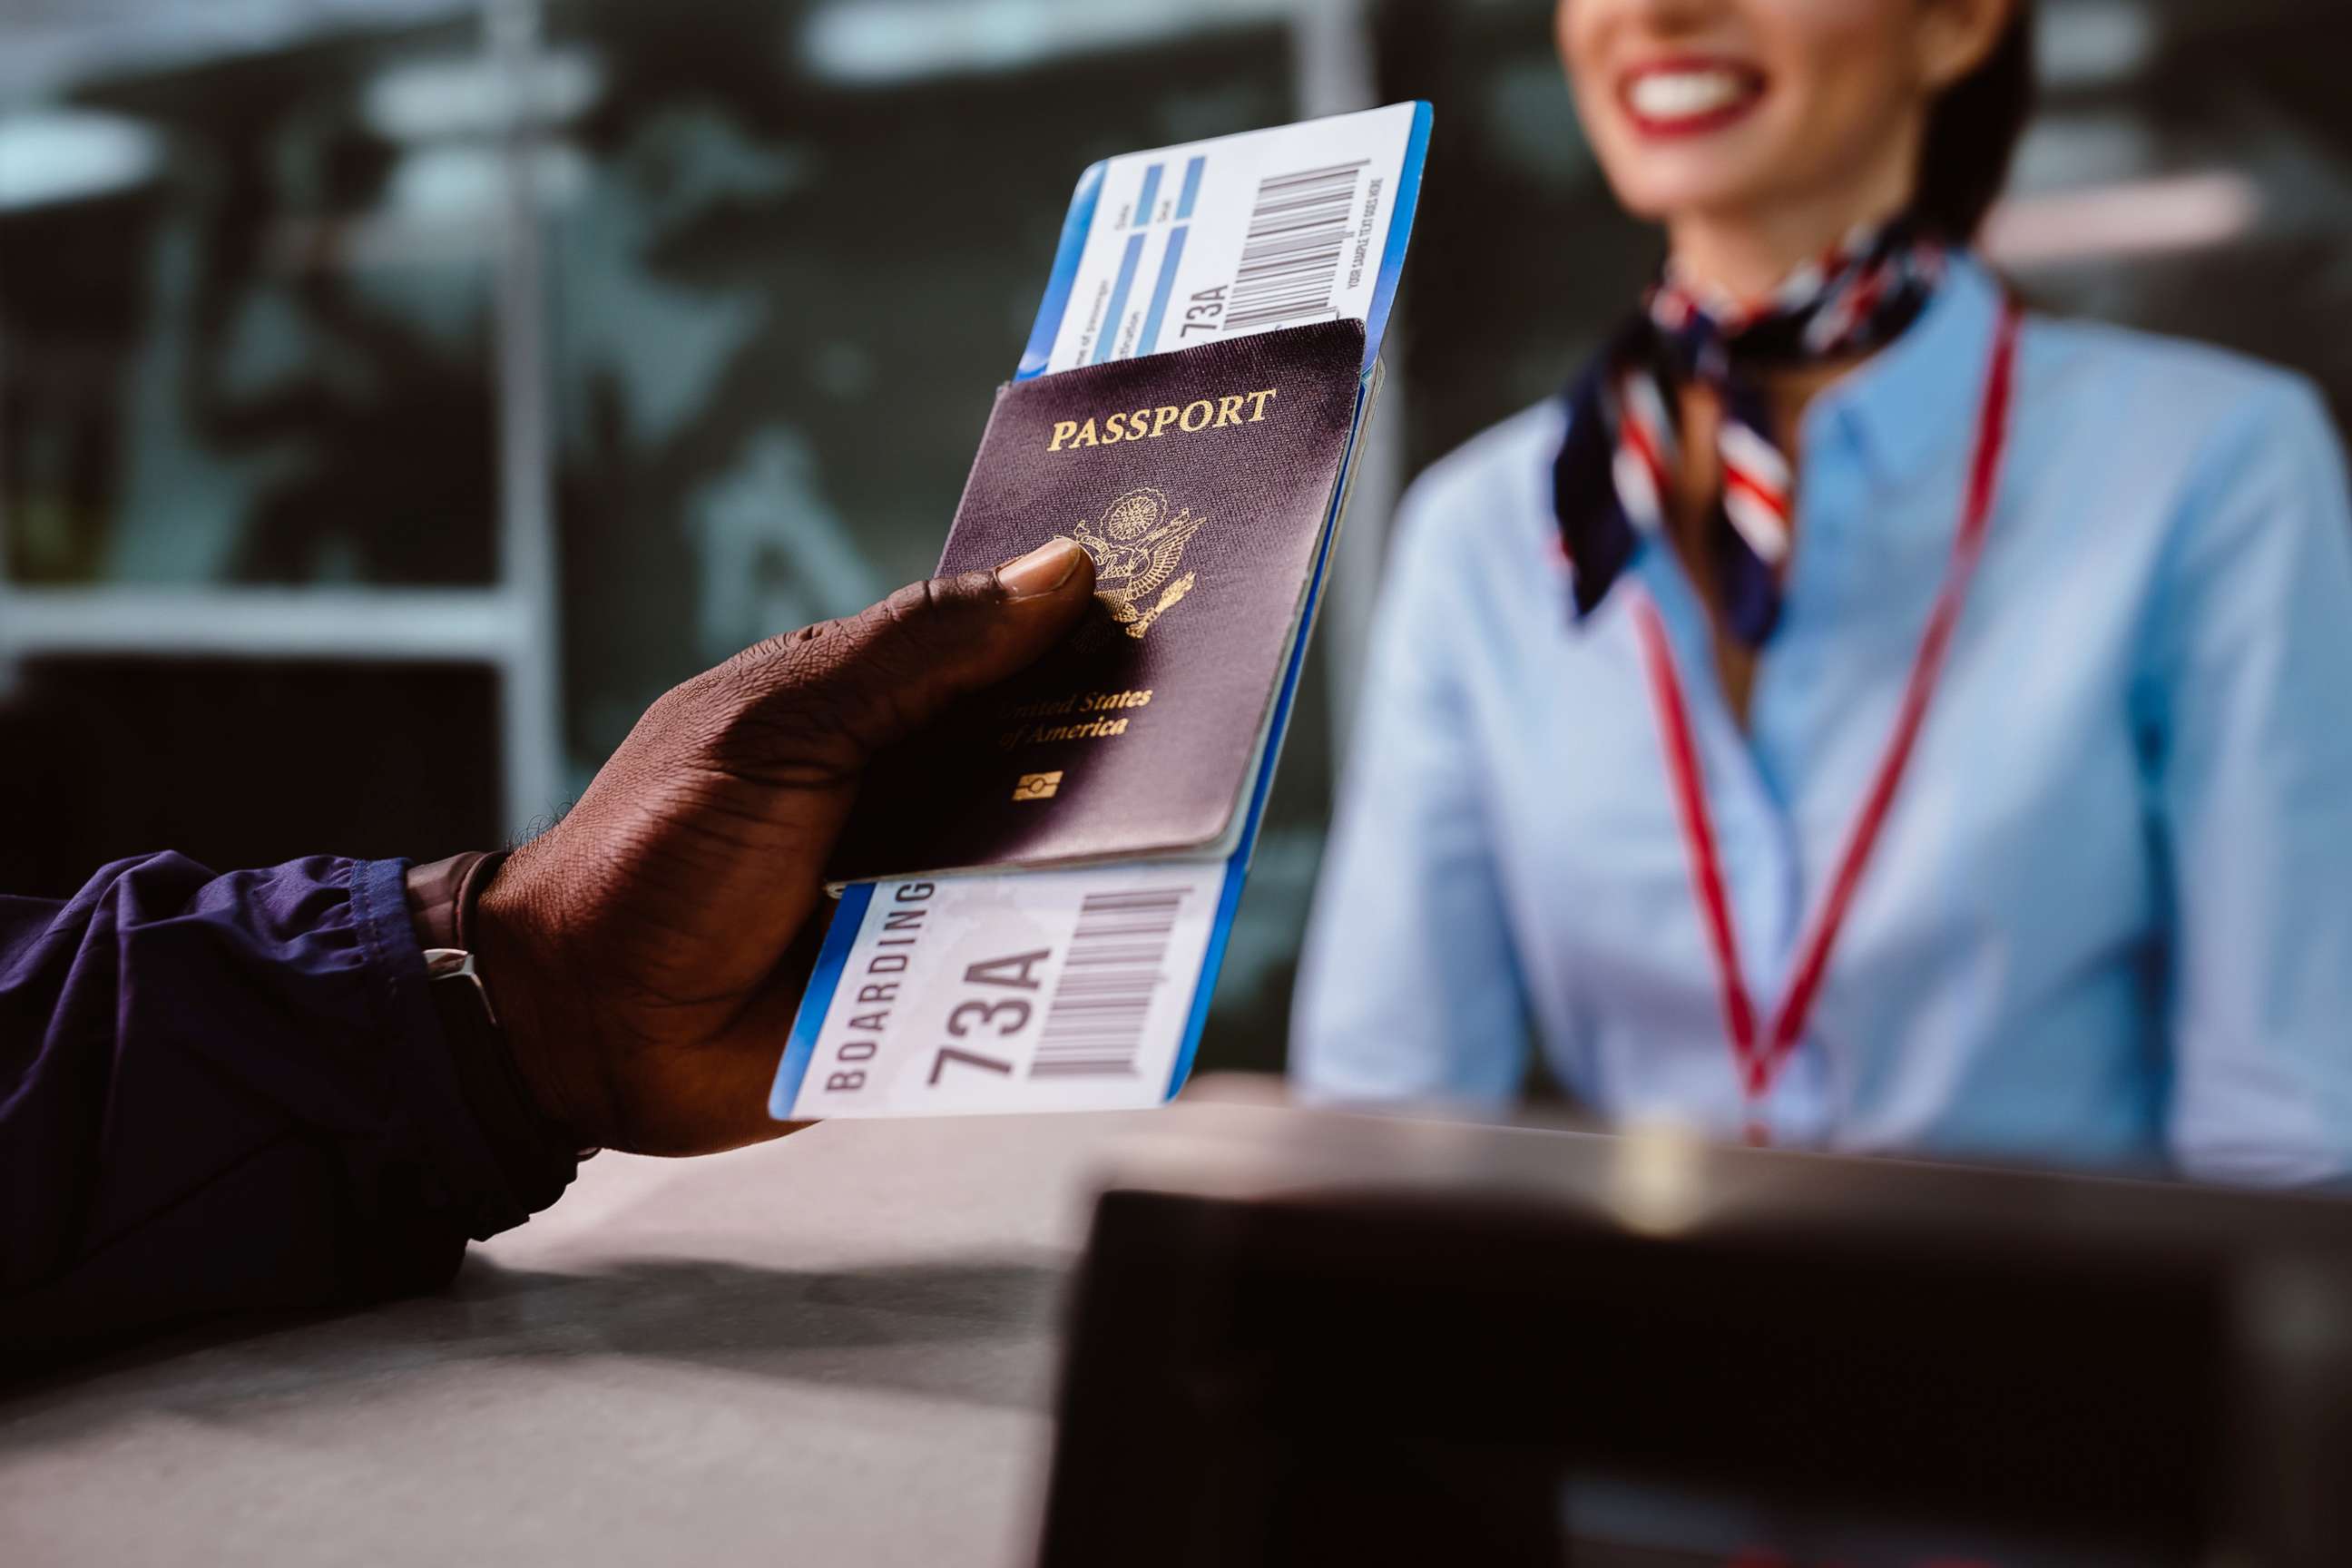 PHOTO: In this undated file photo, a man holds a boarding pass and a passport at an airline check-in desk.